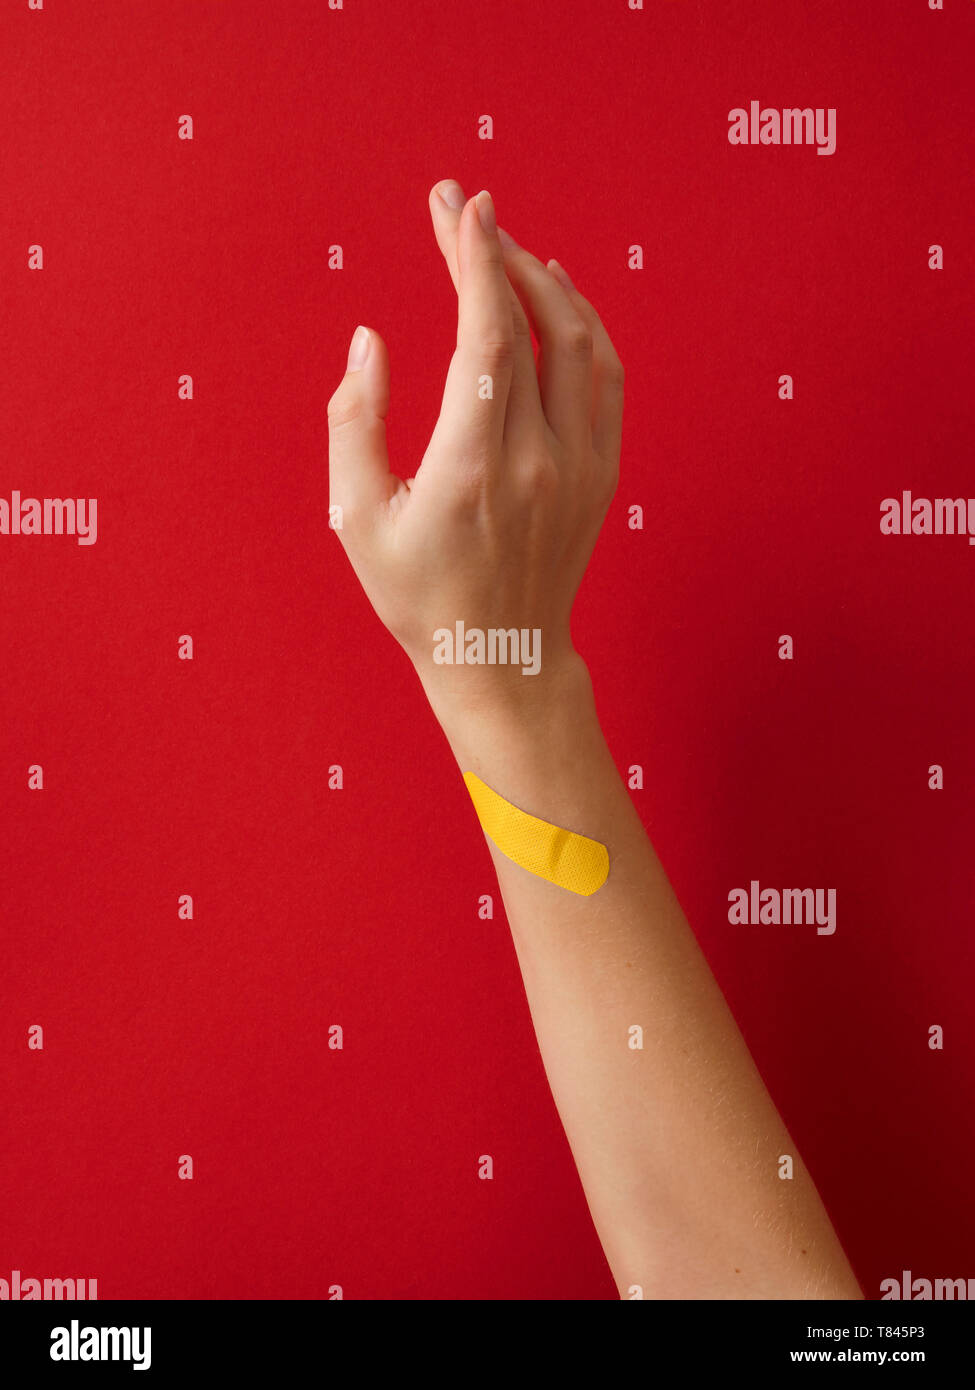 First aid adhesive plaster on woman's wrist against red background Stock Photo